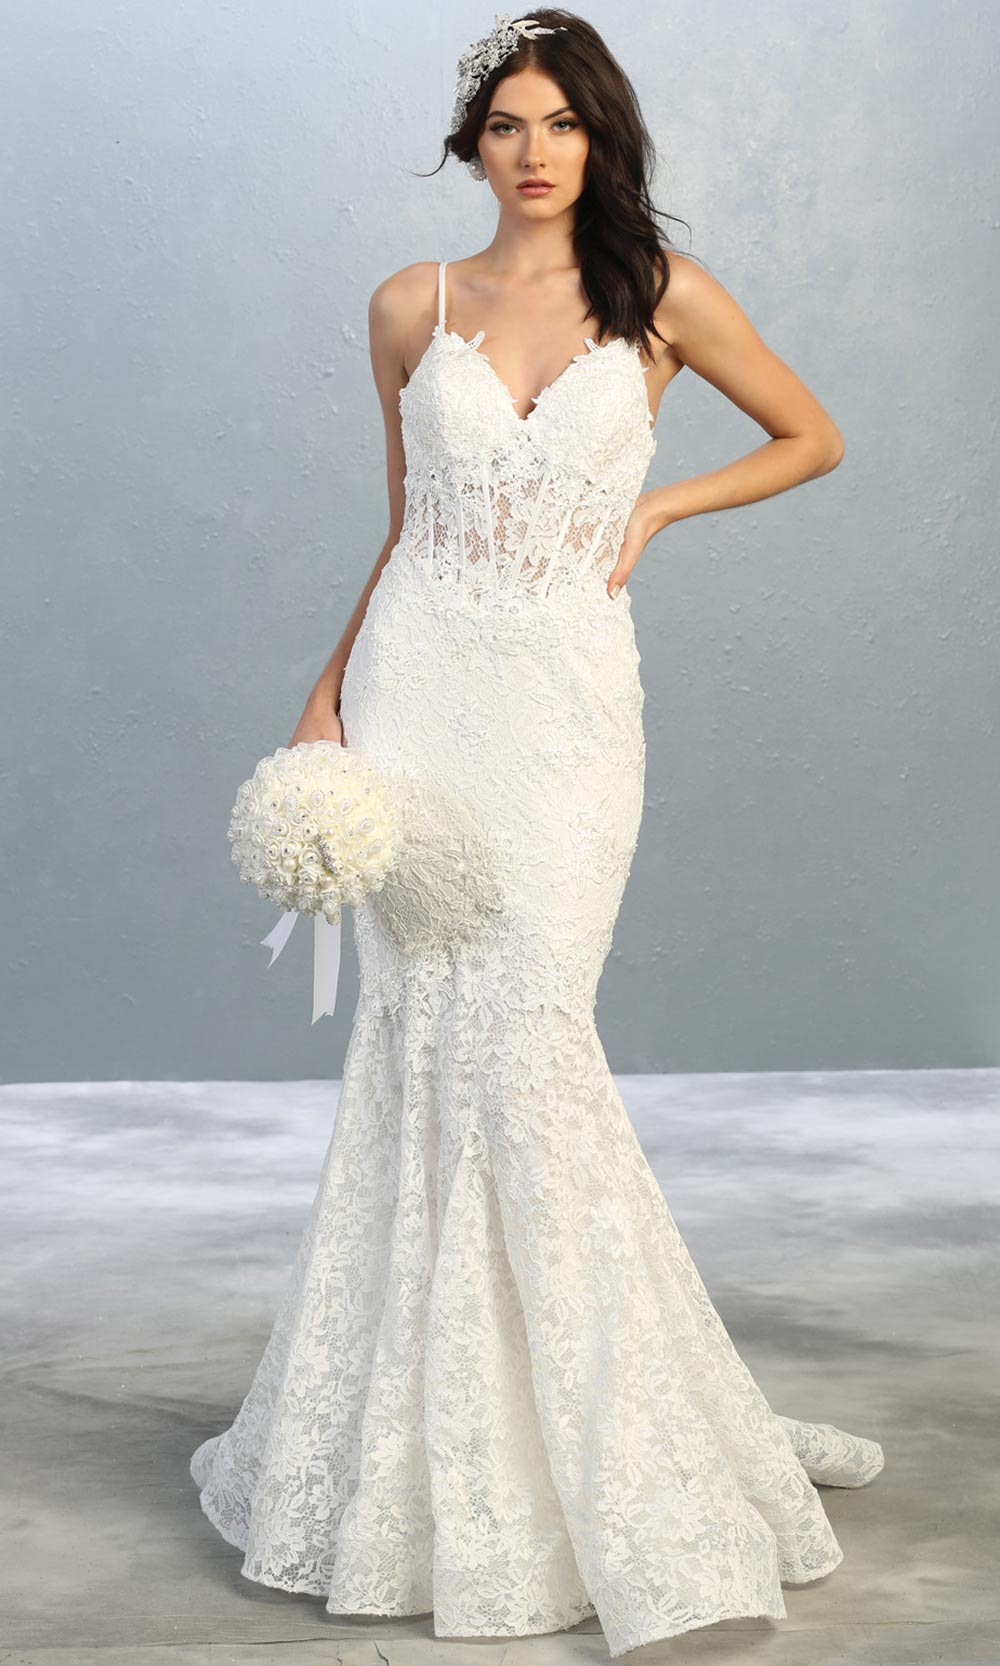 Mayqueen RQ7865-long ivory sexy wedding dress w/v neck & straps. Formal lace mermaid dress is perfect wedding bridal dress, sexy prom dress, court/civil wedding, second wedding, destination wedding dress, cheap wedding dress. Plus sizes avail.jpg